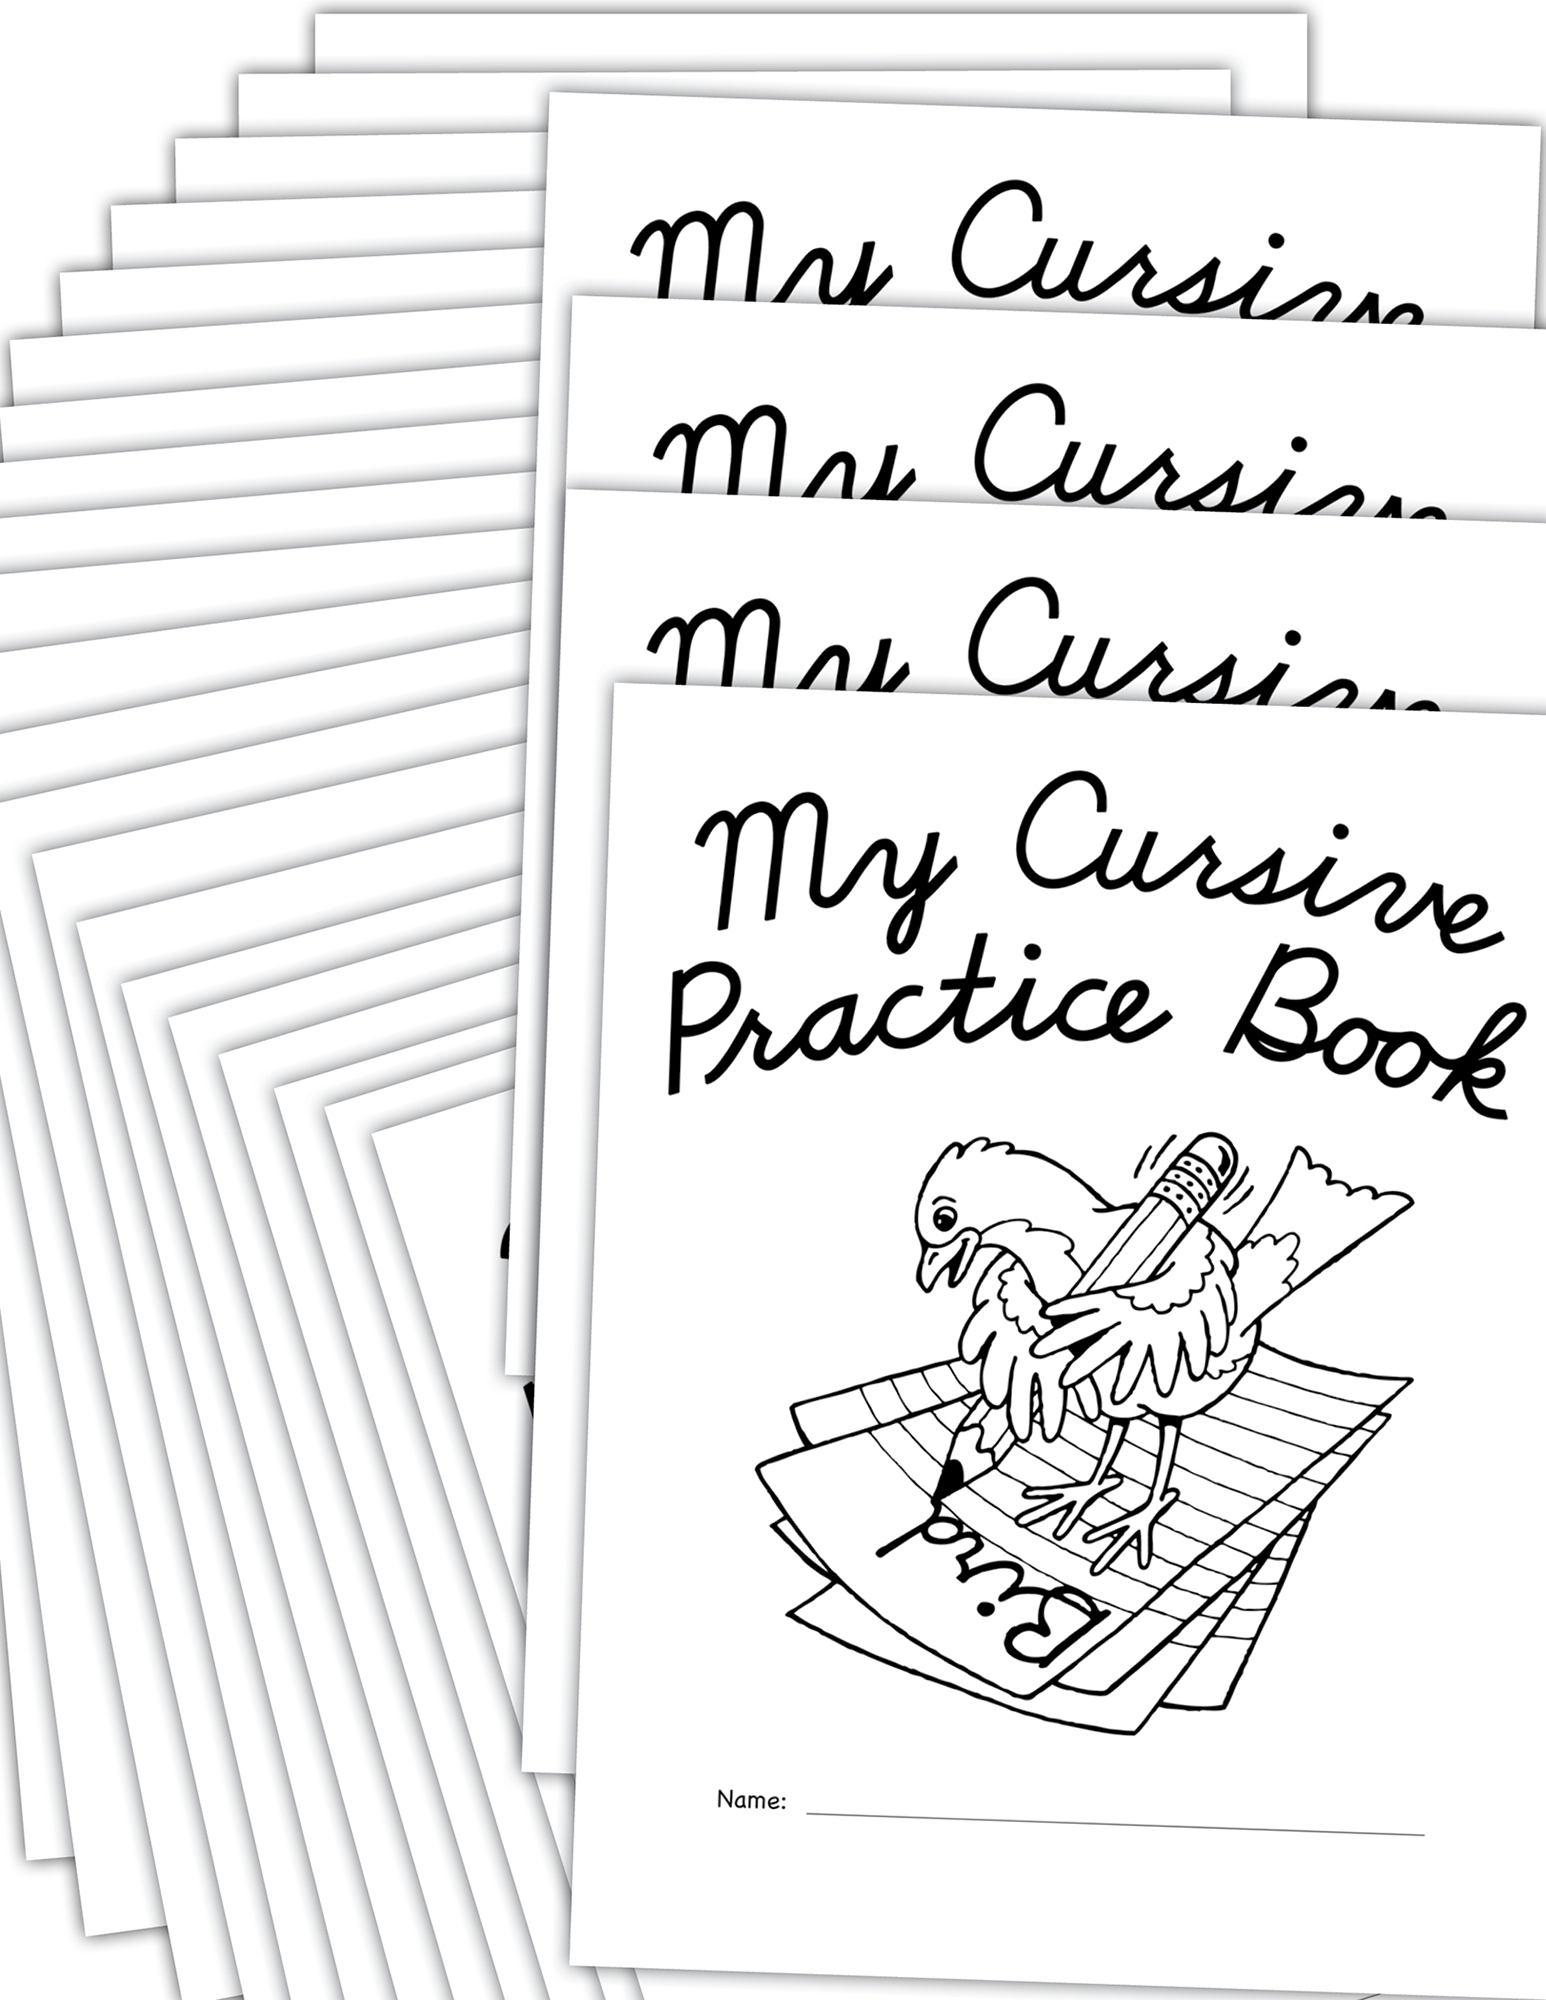 my-own-cursive-practice-book-25-pack-tcr62141-teacher-created-resources